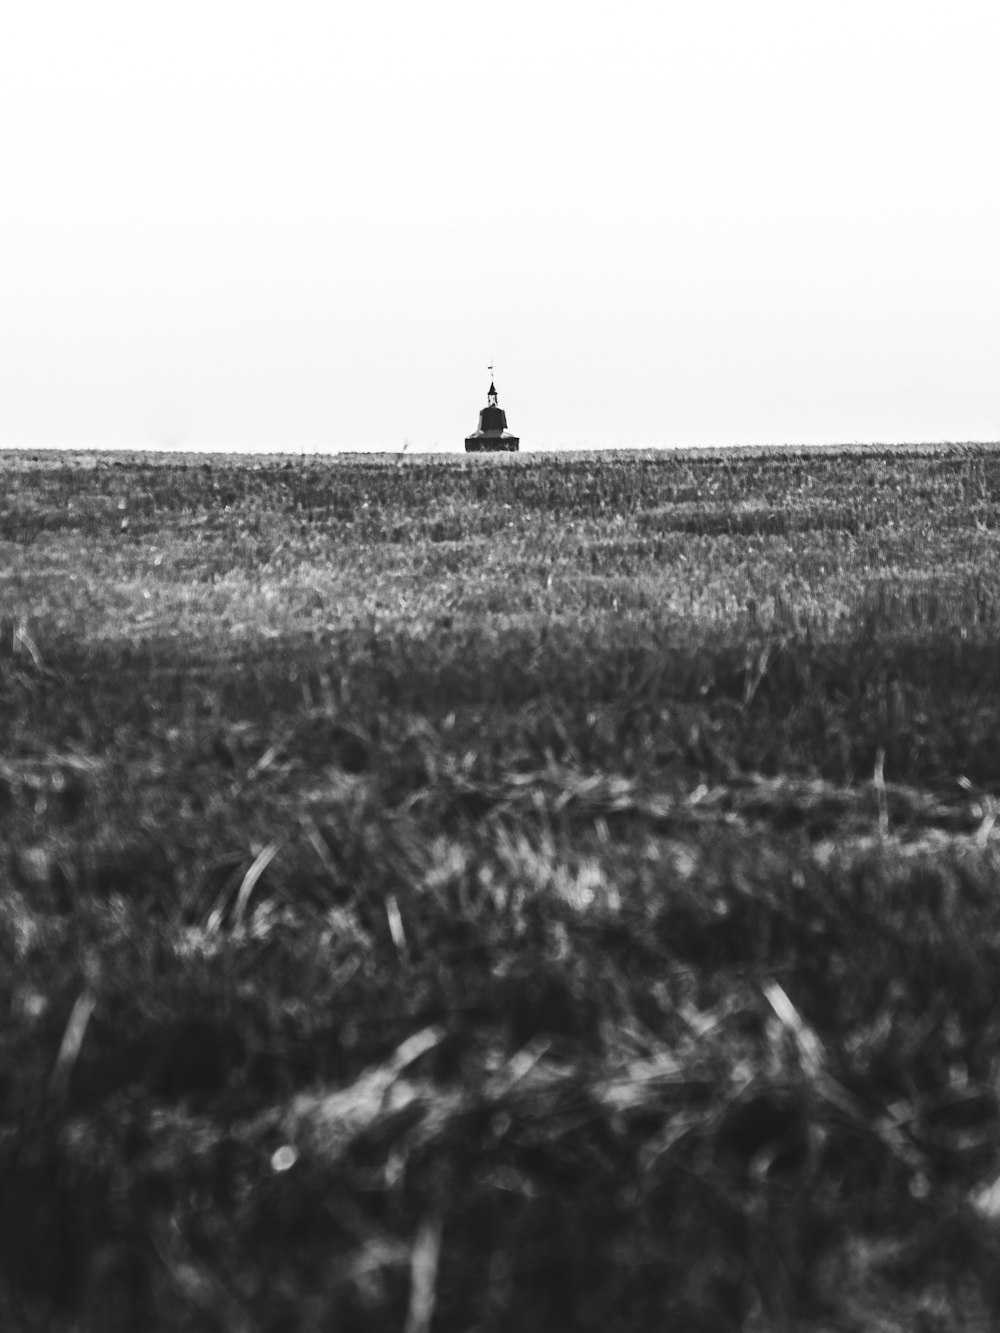 grayscale photo of a person walking on the field